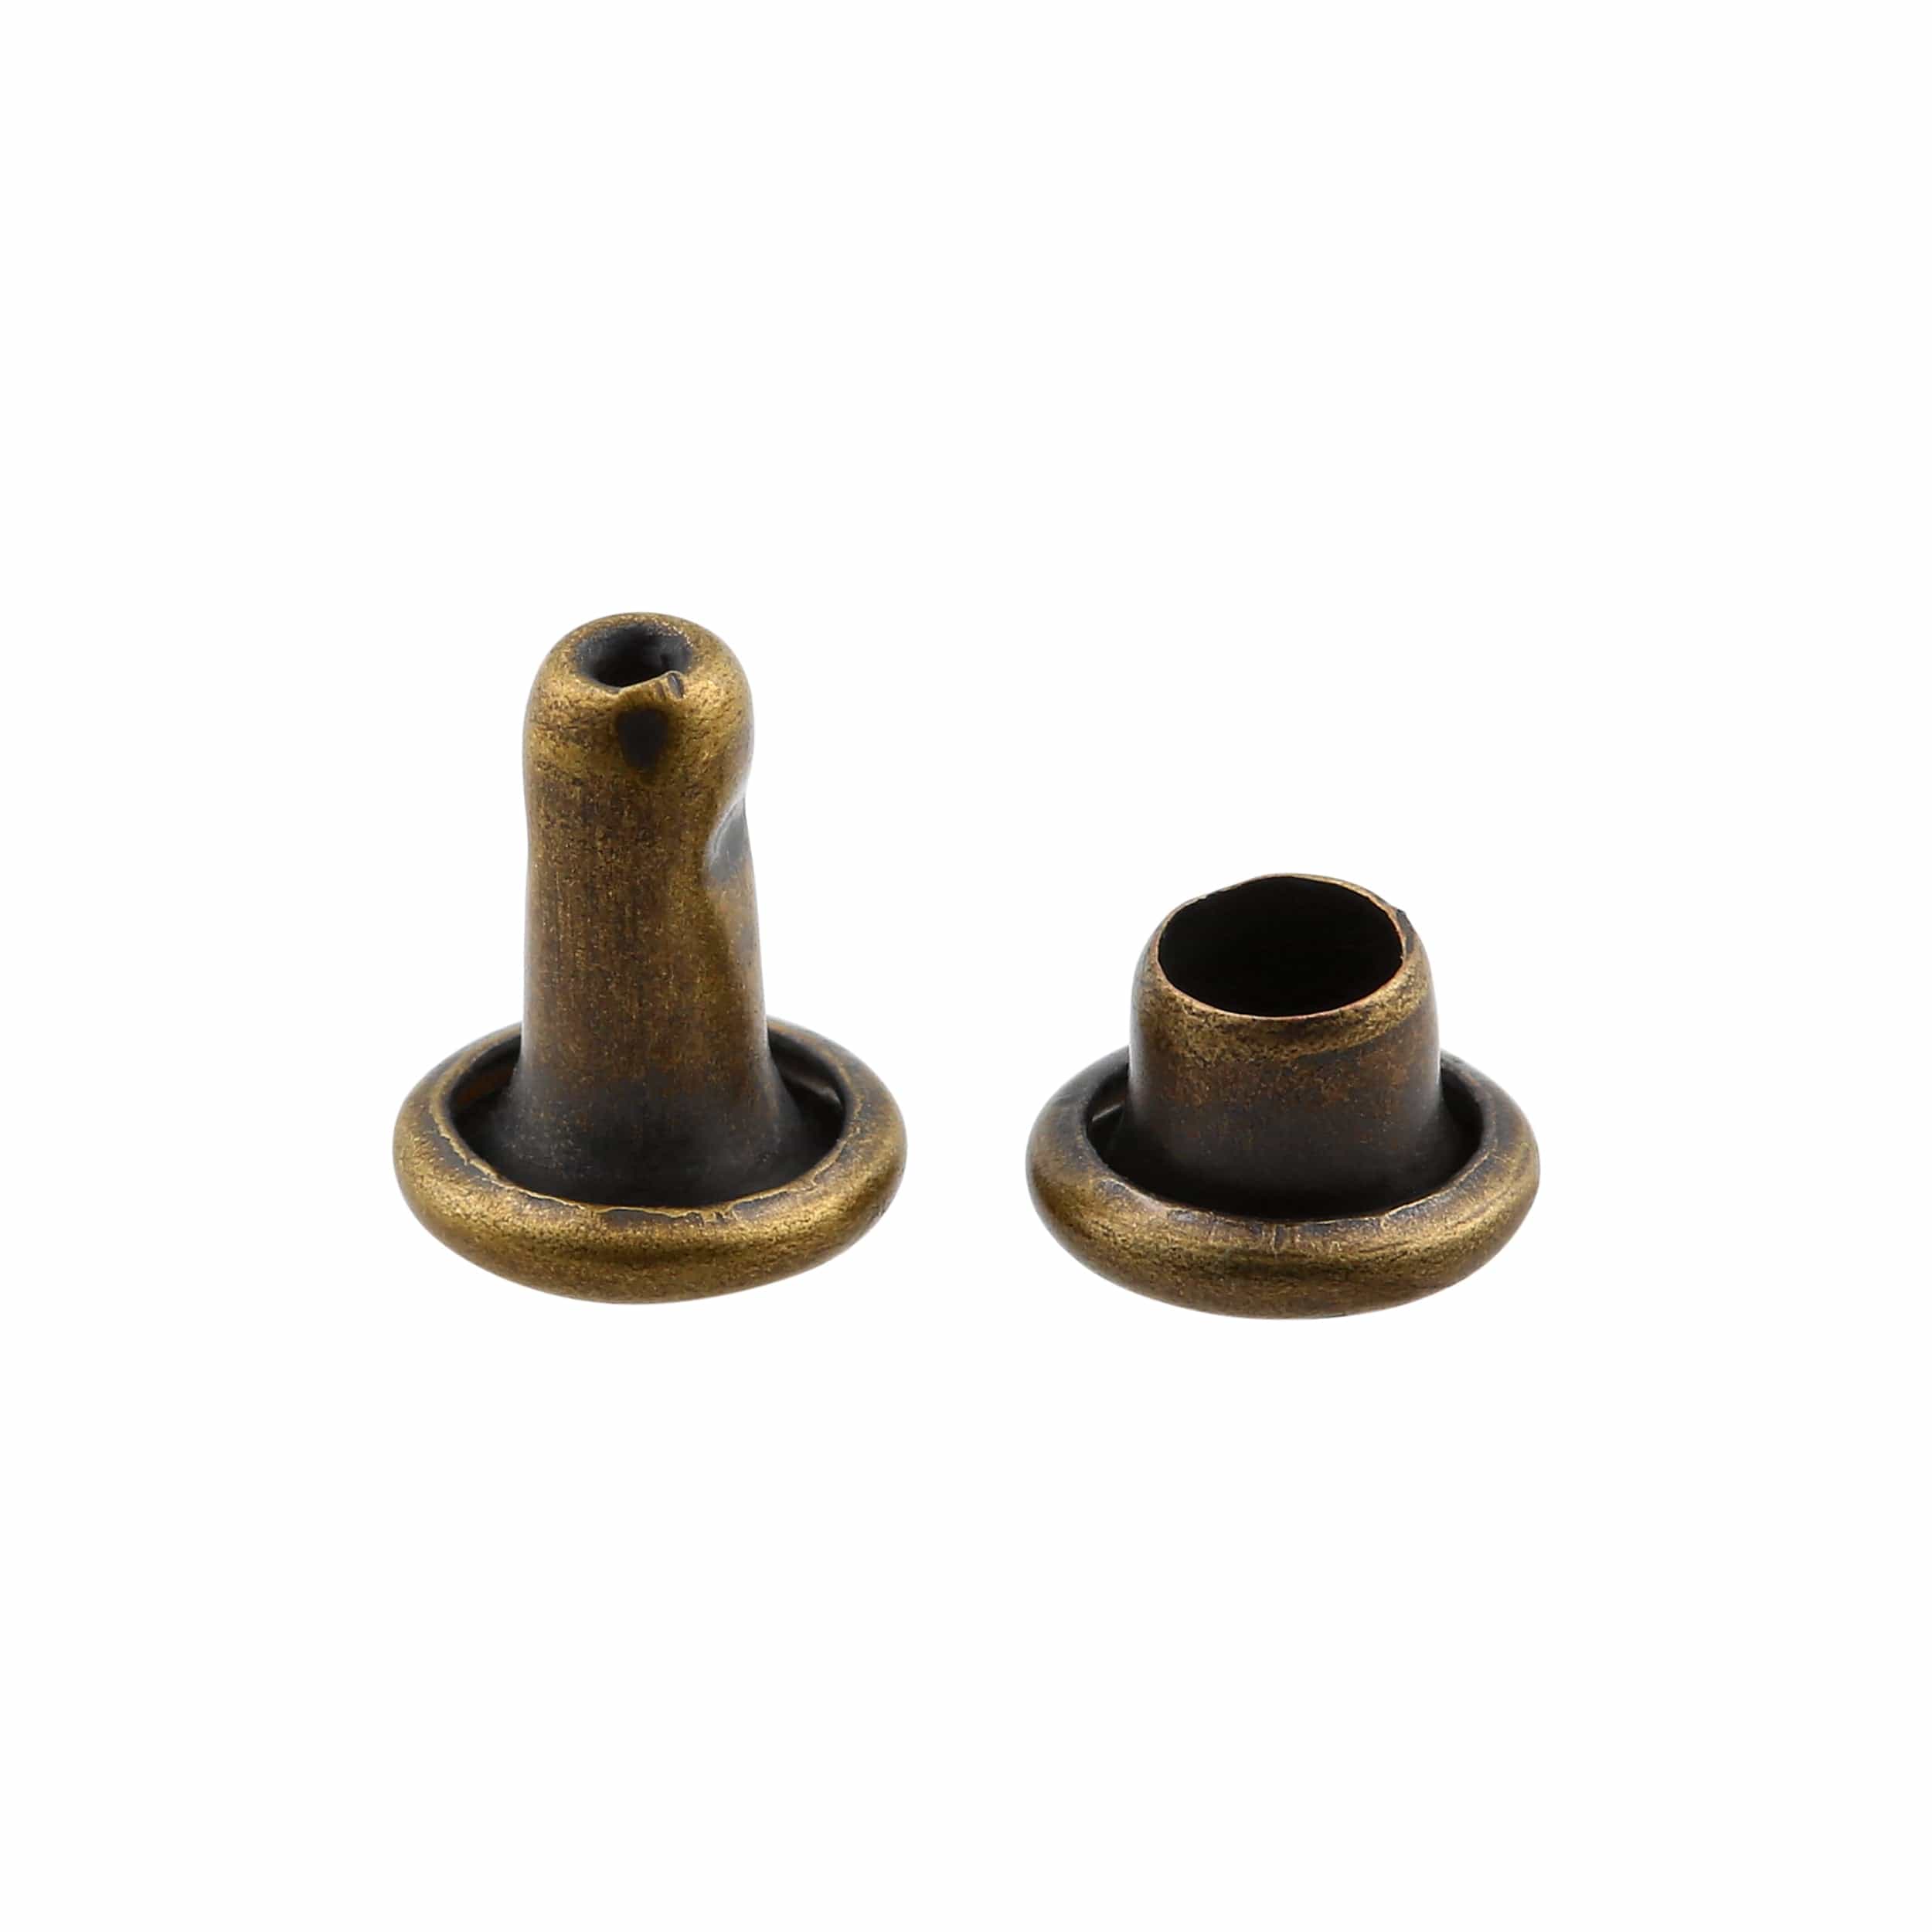 Ohio Travel Bag Fasteners 6mm Antique Brass, Double Cap Jiffy Rivet, Steel, #A-340-ANTB A-340-ANTB